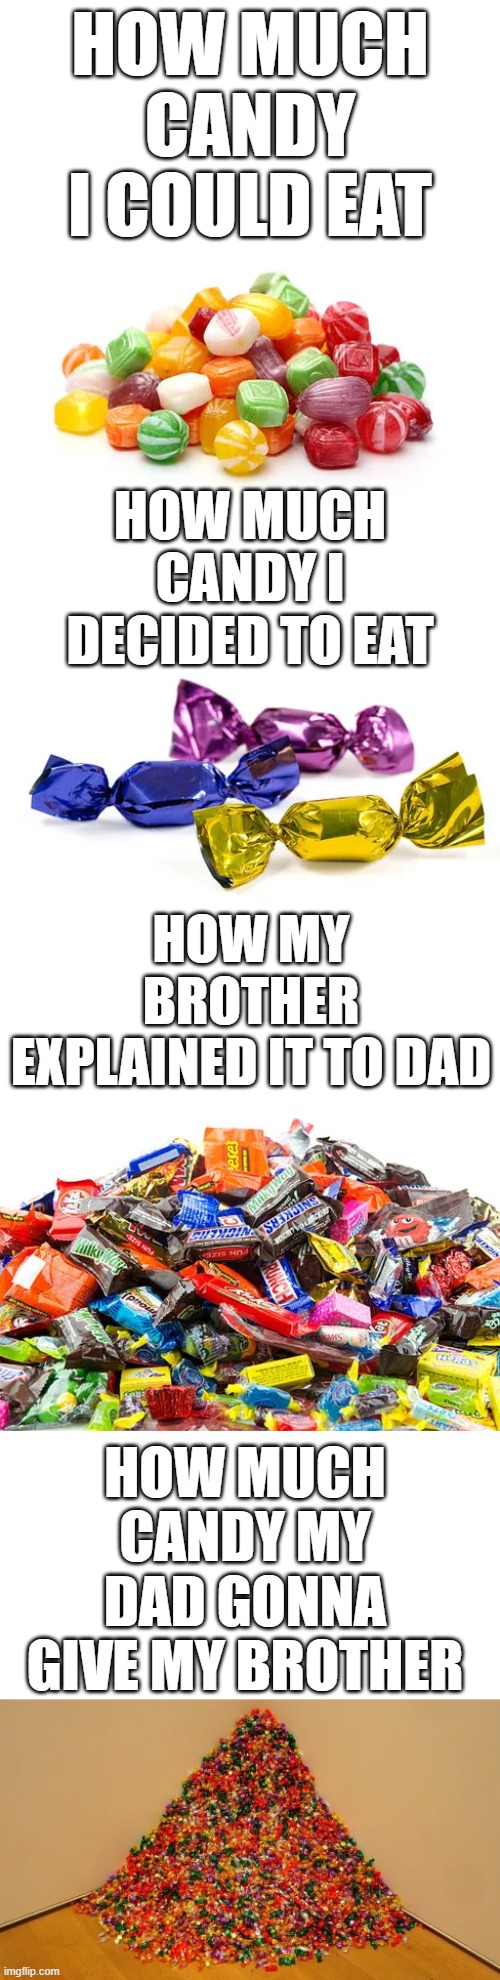 why does this always have to happen | HOW MUCH CANDY I COULD EAT; HOW MUCH CANDY I DECIDED TO EAT; HOW MY BROTHER EXPLAINED IT TO DAD; HOW MUCH CANDY MY DAD GONNA GIVE MY BROTHER | image tagged in candy levels,candy,brother,dad | made w/ Imgflip meme maker